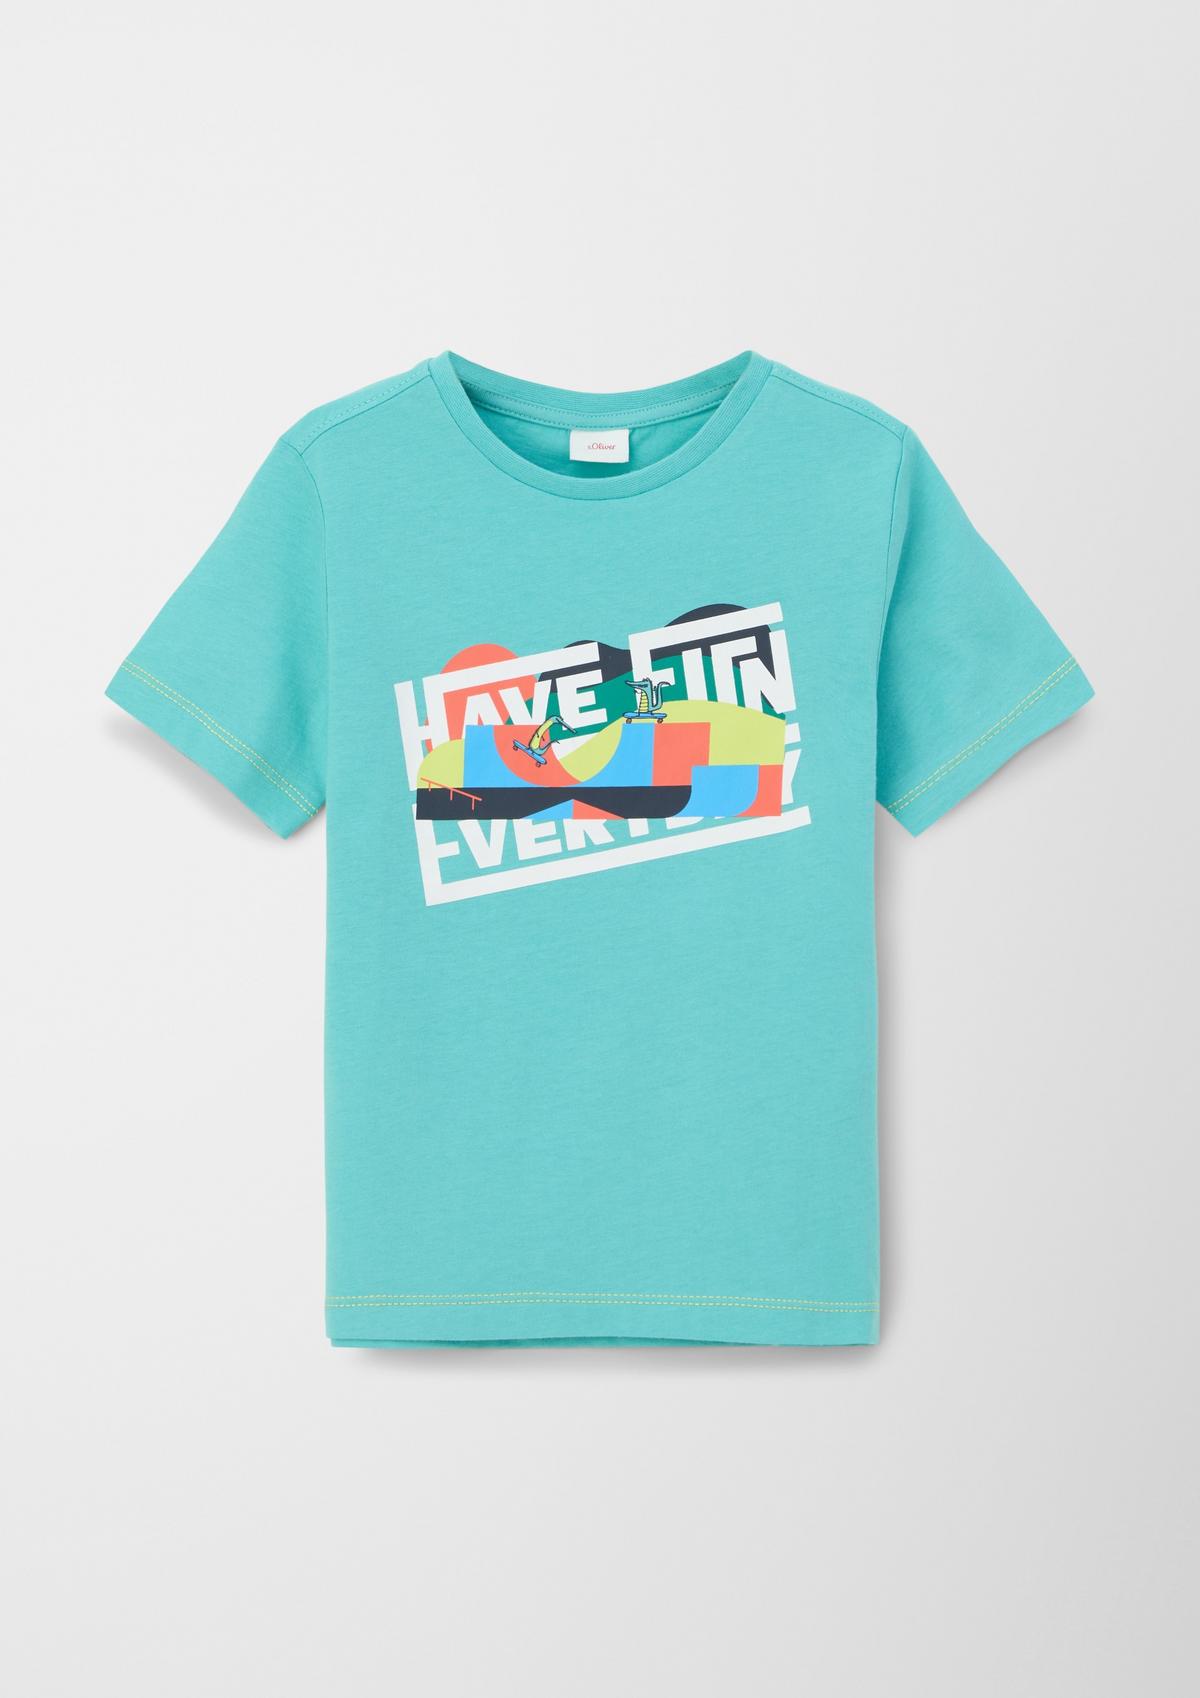 teens and Order online for T-shirts boys